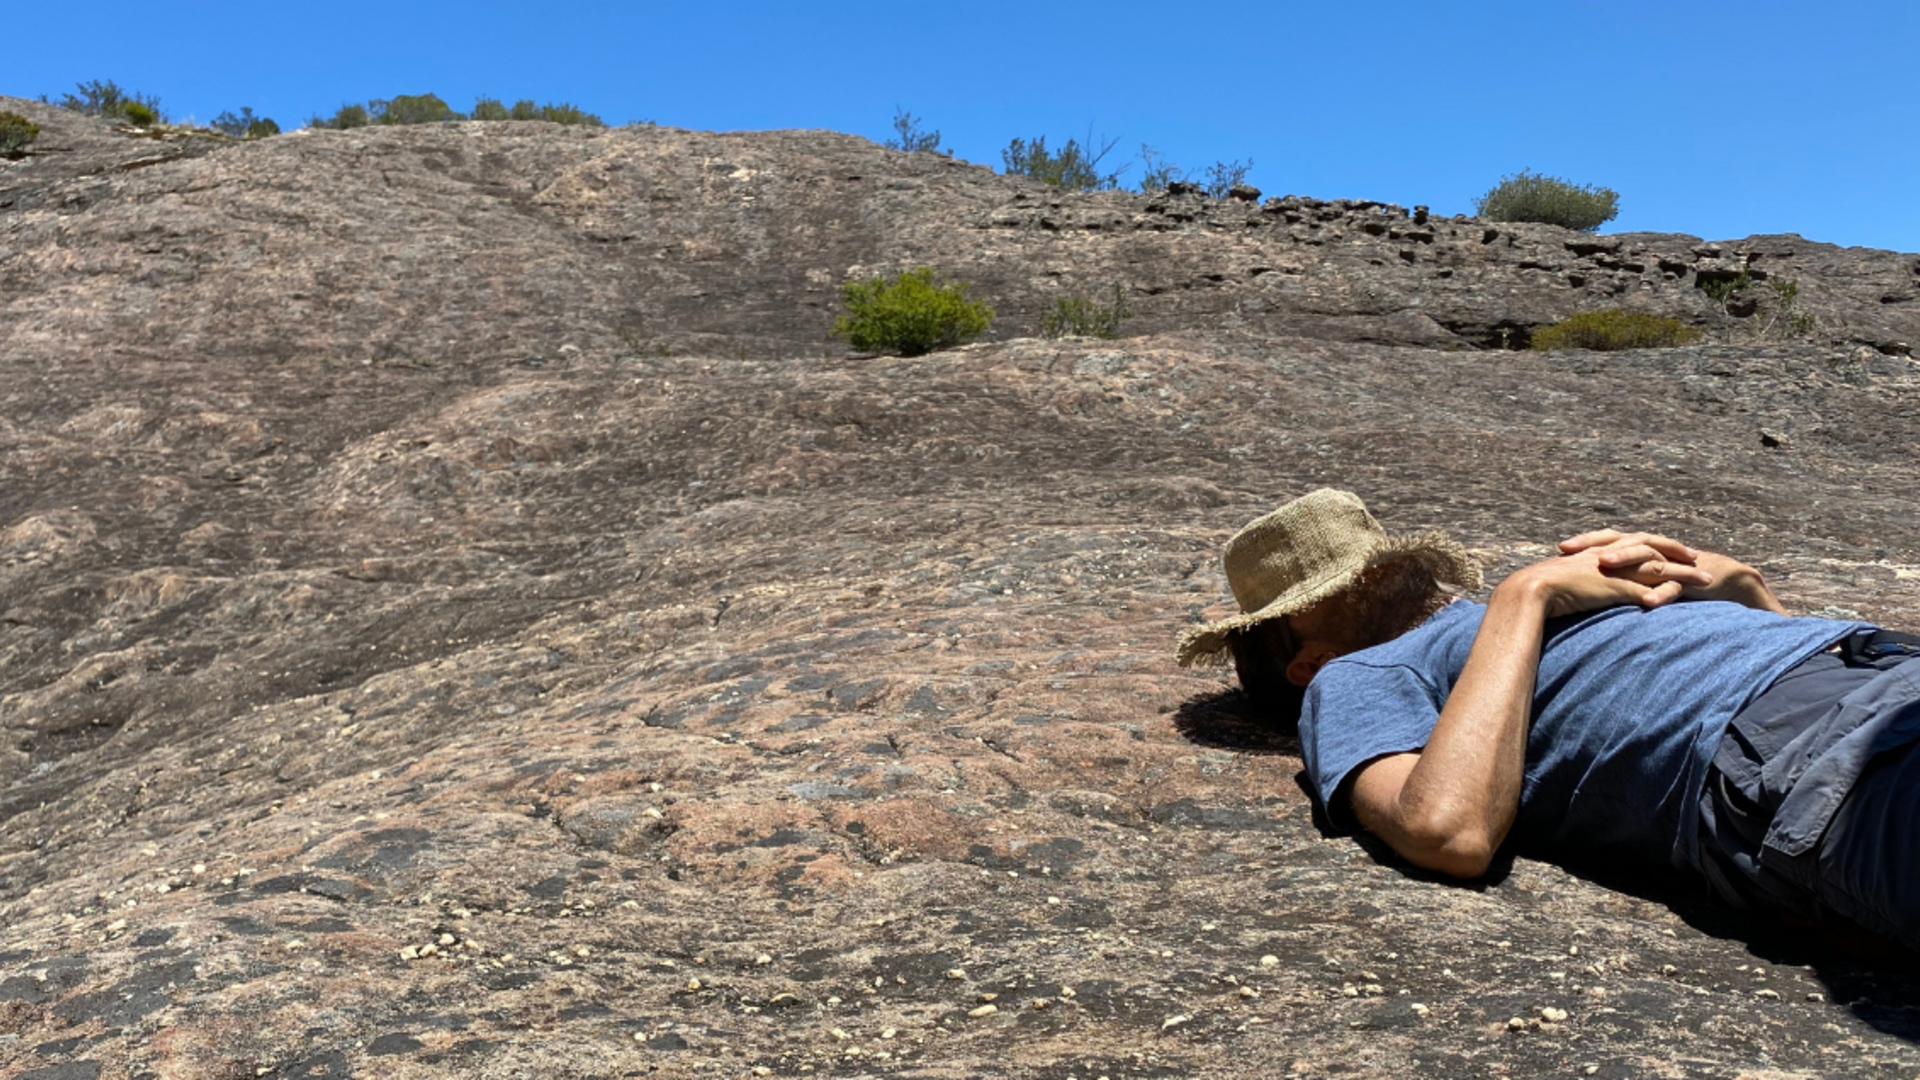 A person resting on rocks, with a brimmed hat covering their face. The sky is vivid blue.